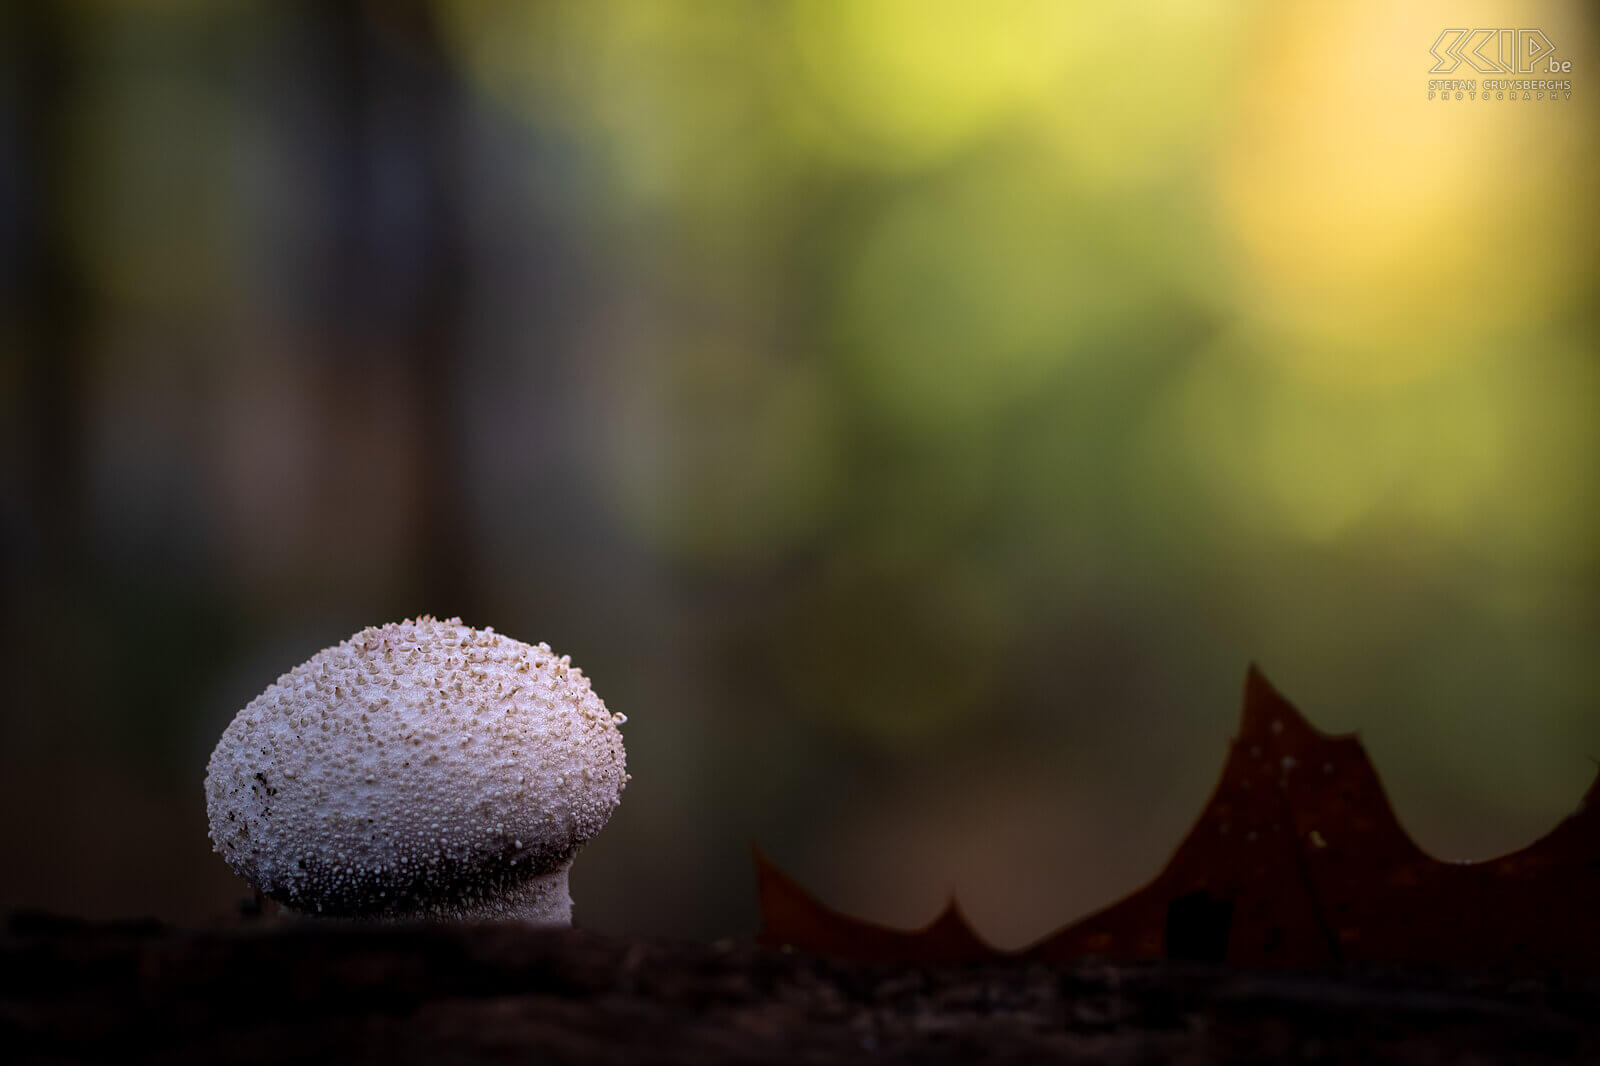 Mushrooms - Common puffball This autumn many beautiful mushrooms and fungi appear again in our forests and gardens Stefan Cruysberghs